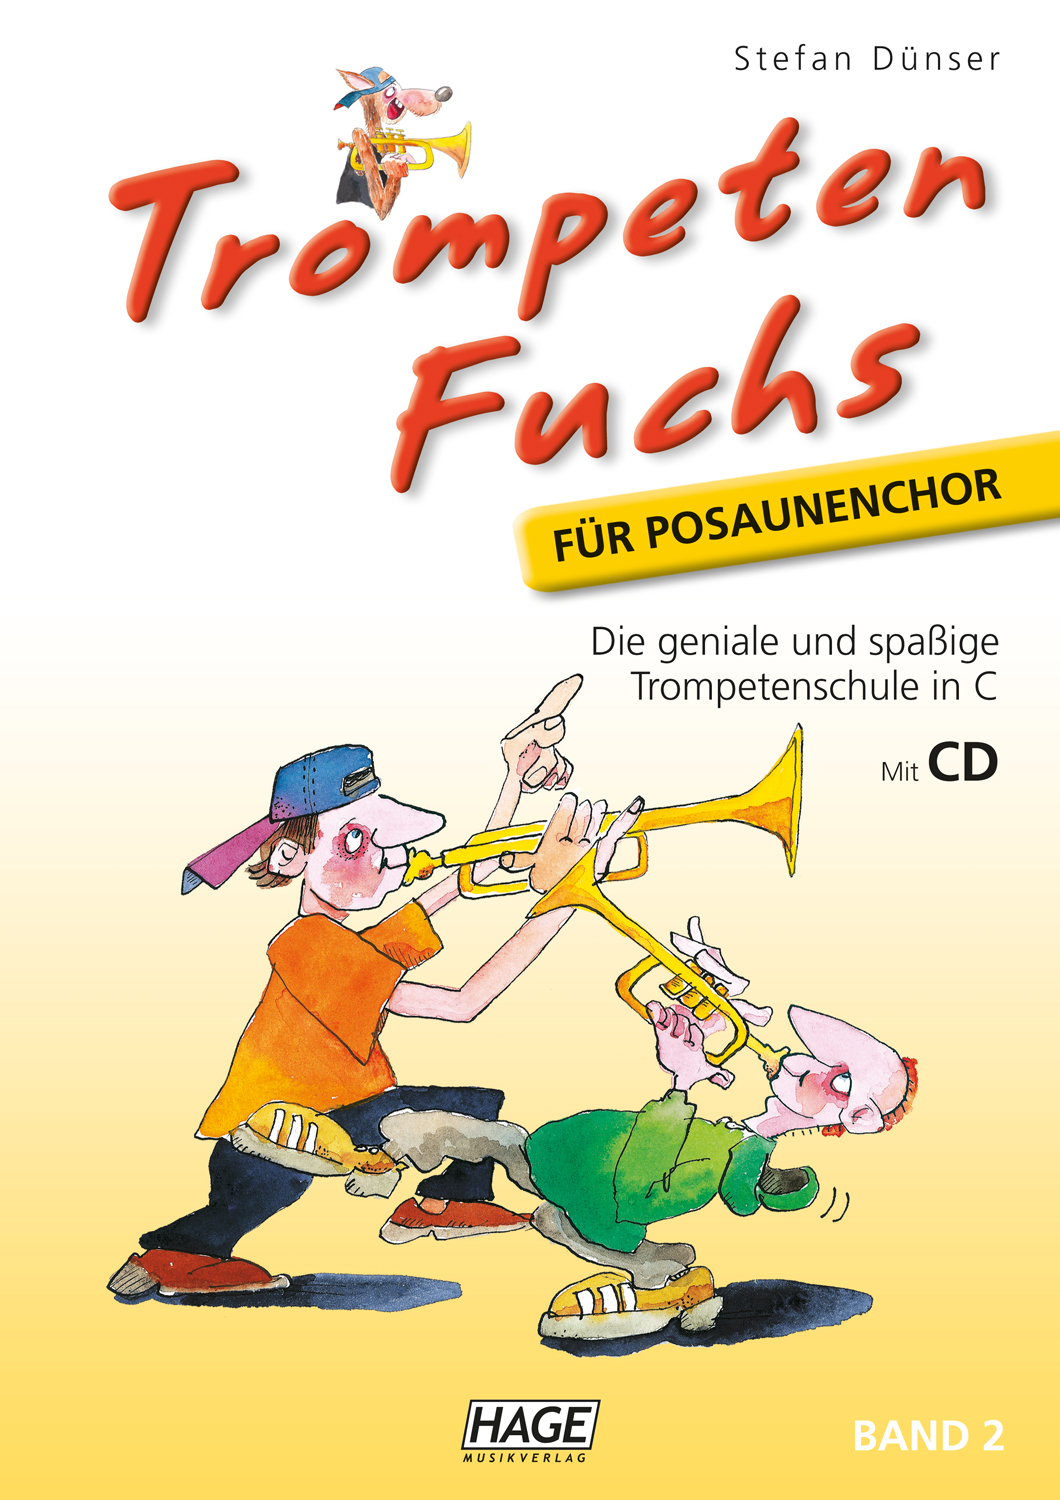 Trompeten Fuchs Band 2 in C for trombone choir (with CD)